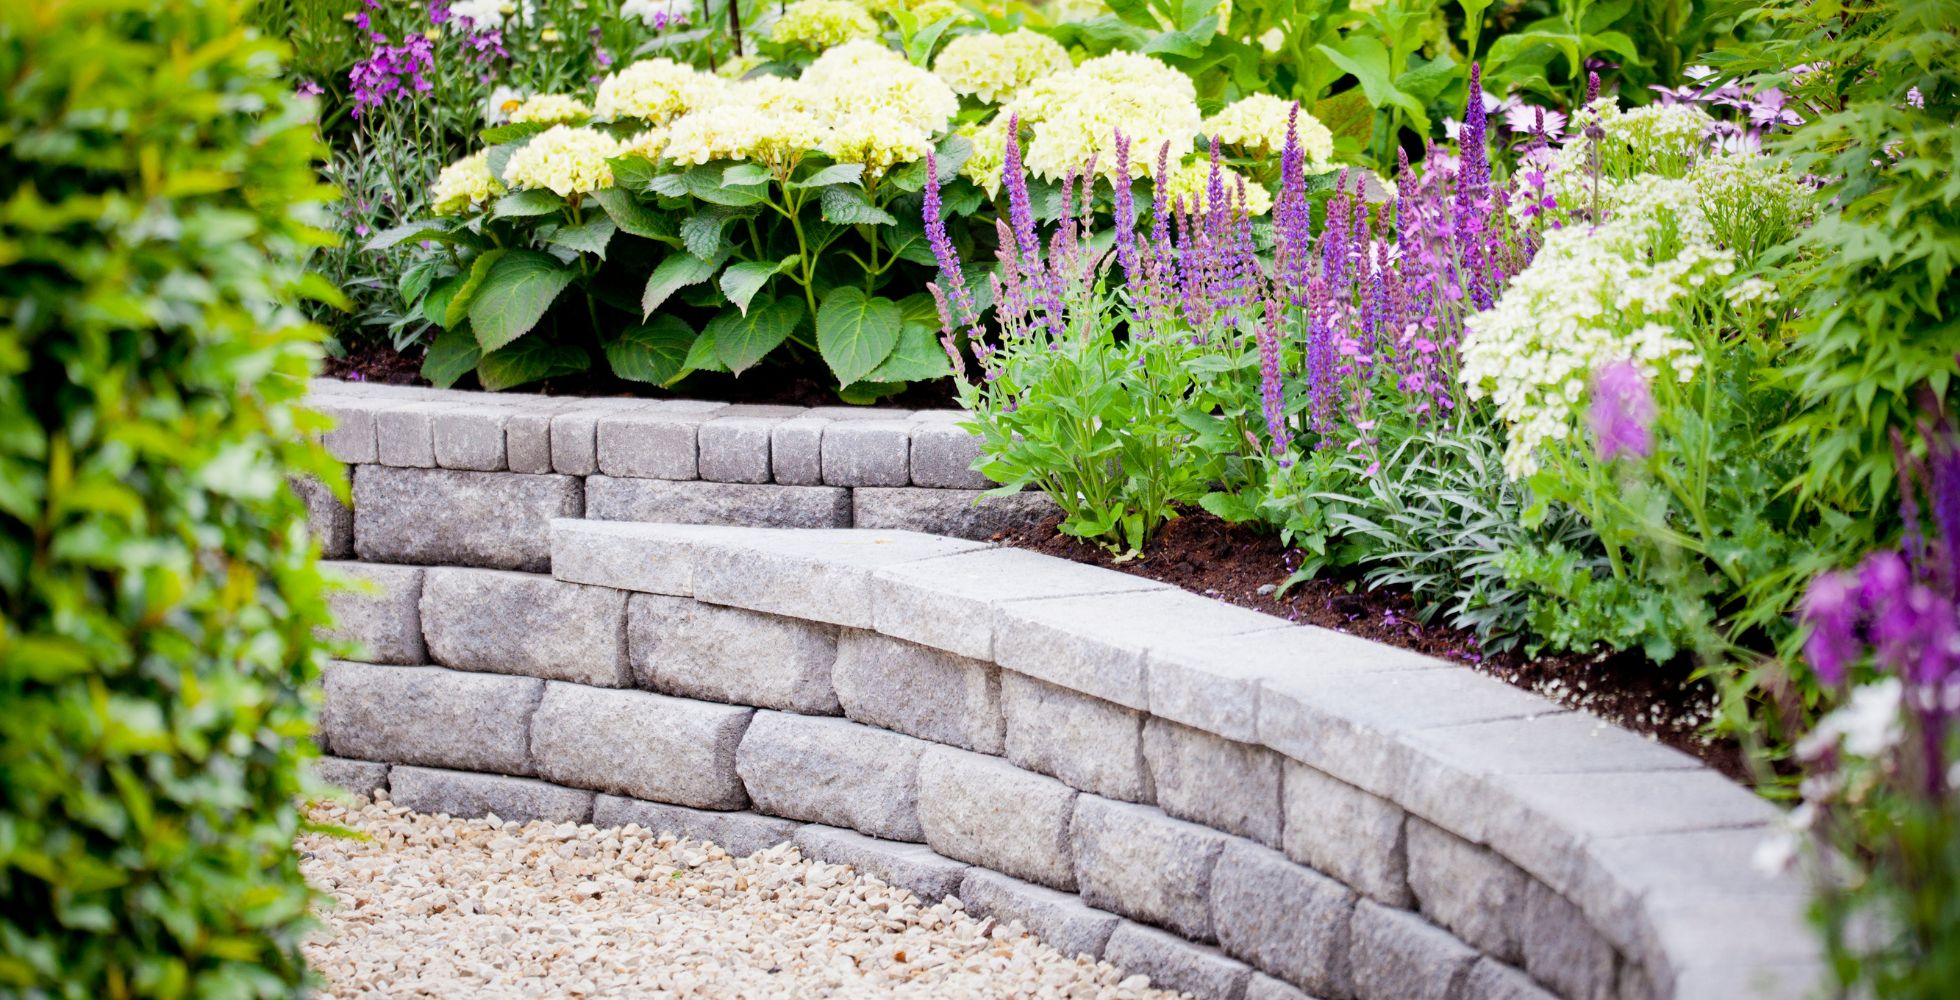 Landscaping and Hardscaping Services in Manchester-by-the-Sea MA